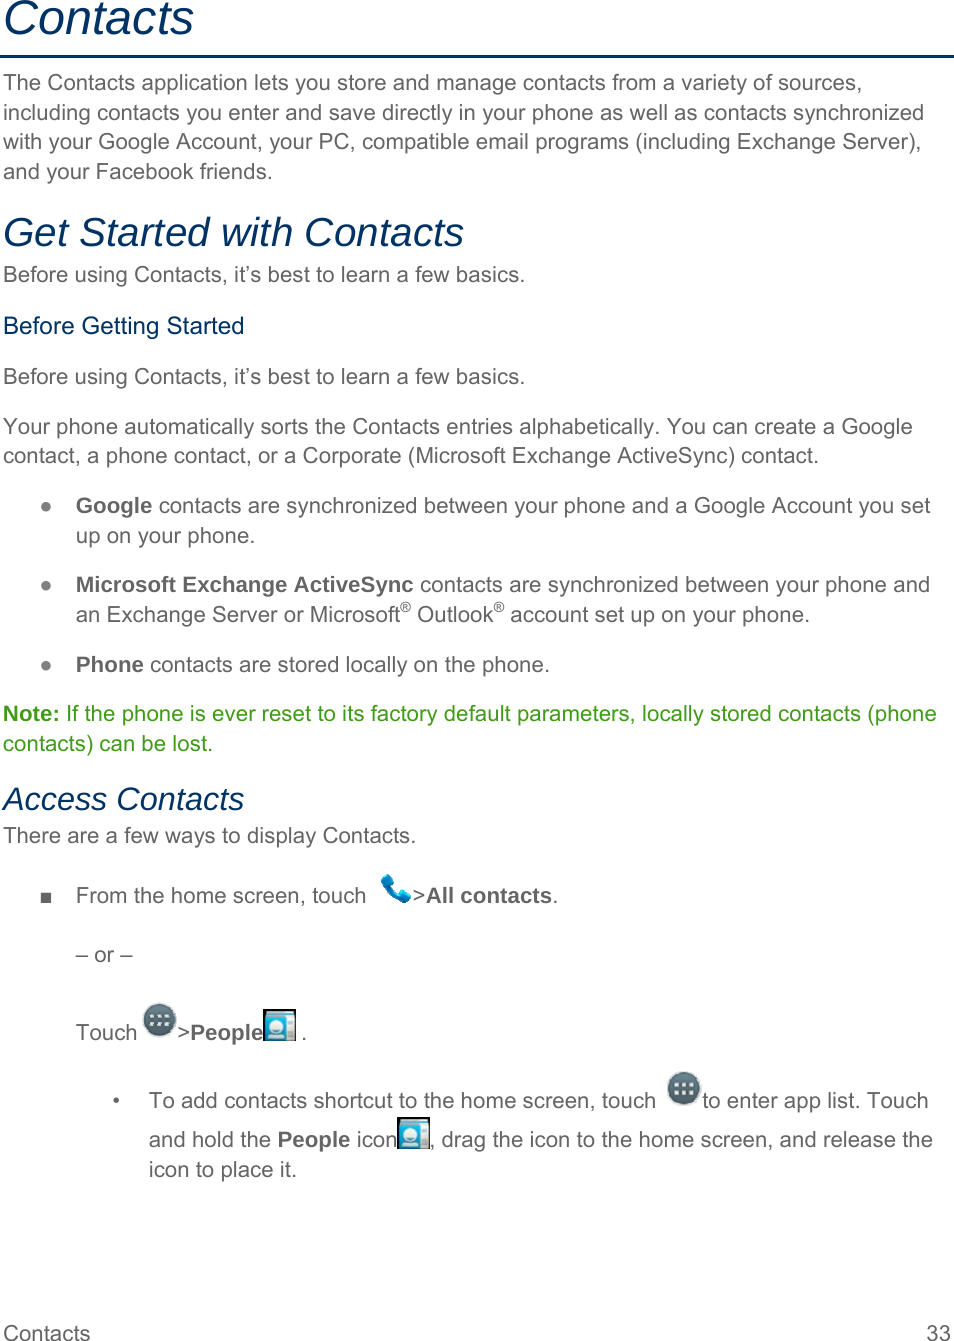 Contacts  33 Contacts The Contacts application lets you store and manage contacts from a variety of sources, including contacts you enter and save directly in your phone as well as contacts synchronized with your Google Account, your PC, compatible email programs (including Exchange Server), and your Facebook friends. Get Started with Contacts Before using Contacts, it’s best to learn a few basics. Before Getting Started Before using Contacts, it’s best to learn a few basics. Your phone automatically sorts the Contacts entries alphabetically. You can create a Google contact, a phone contact, or a Corporate (Microsoft Exchange ActiveSync) contact. ● Google contacts are synchronized between your phone and a Google Account you set up on your phone. ● Microsoft Exchange ActiveSync contacts are synchronized between your phone and an Exchange Server or Microsoft® Outlook® account set up on your phone. ● Phone contacts are stored locally on the phone. Note: If the phone is ever reset to its factory default parameters, locally stored contacts (phone contacts) can be lost. Access Contacts There are a few ways to display Contacts. ■  From the home screen, touch   &gt;All contacts.  – or –  Touch &gt;People  . •  To add contacts shortcut to the home screen, touch  to enter app list. Touch and hold the People icon , drag the icon to the home screen, and release the icon to place it. 